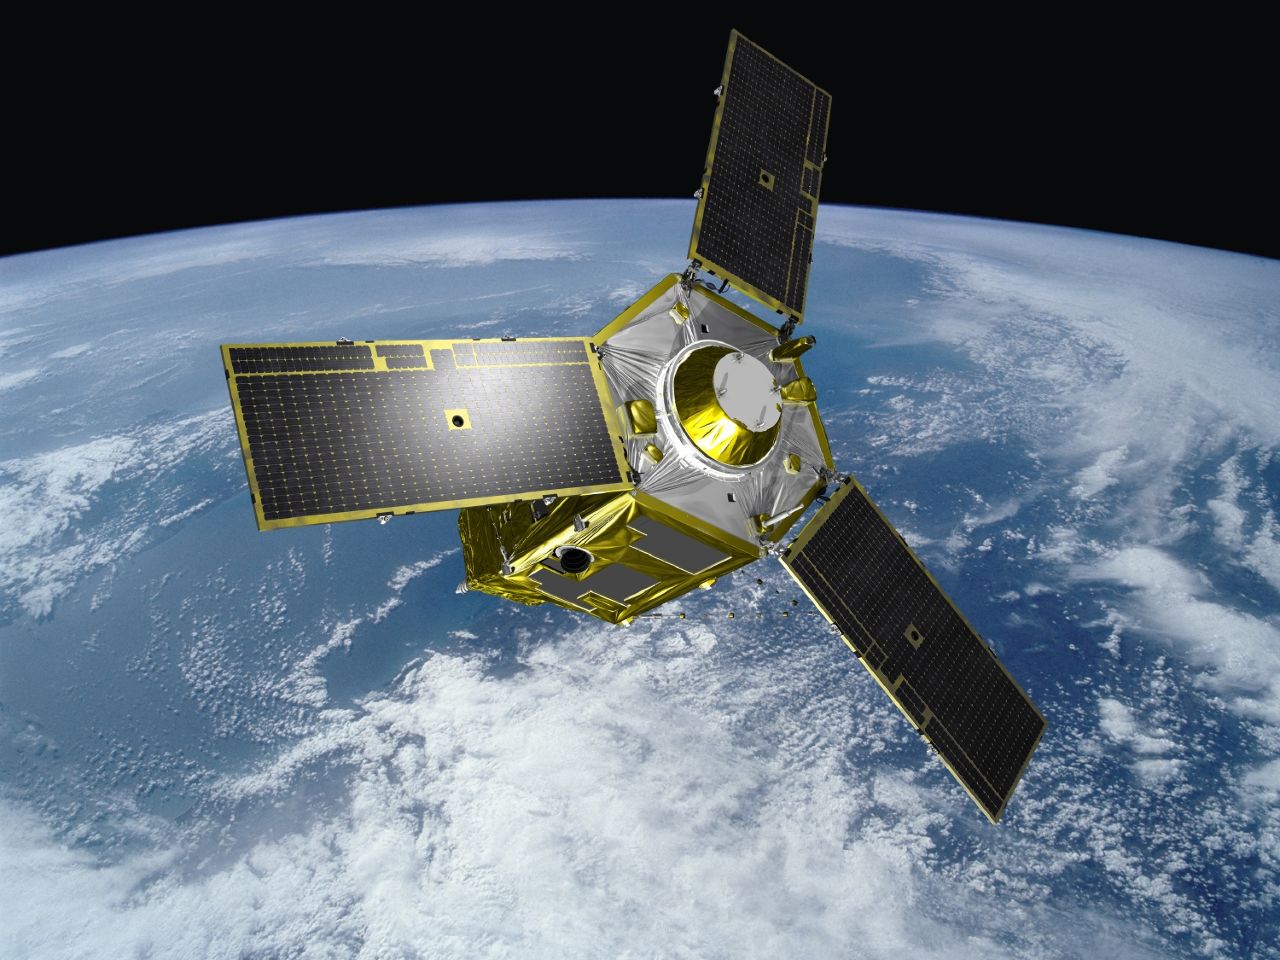 Airbus DS developing new-gen optical satellites for 2020